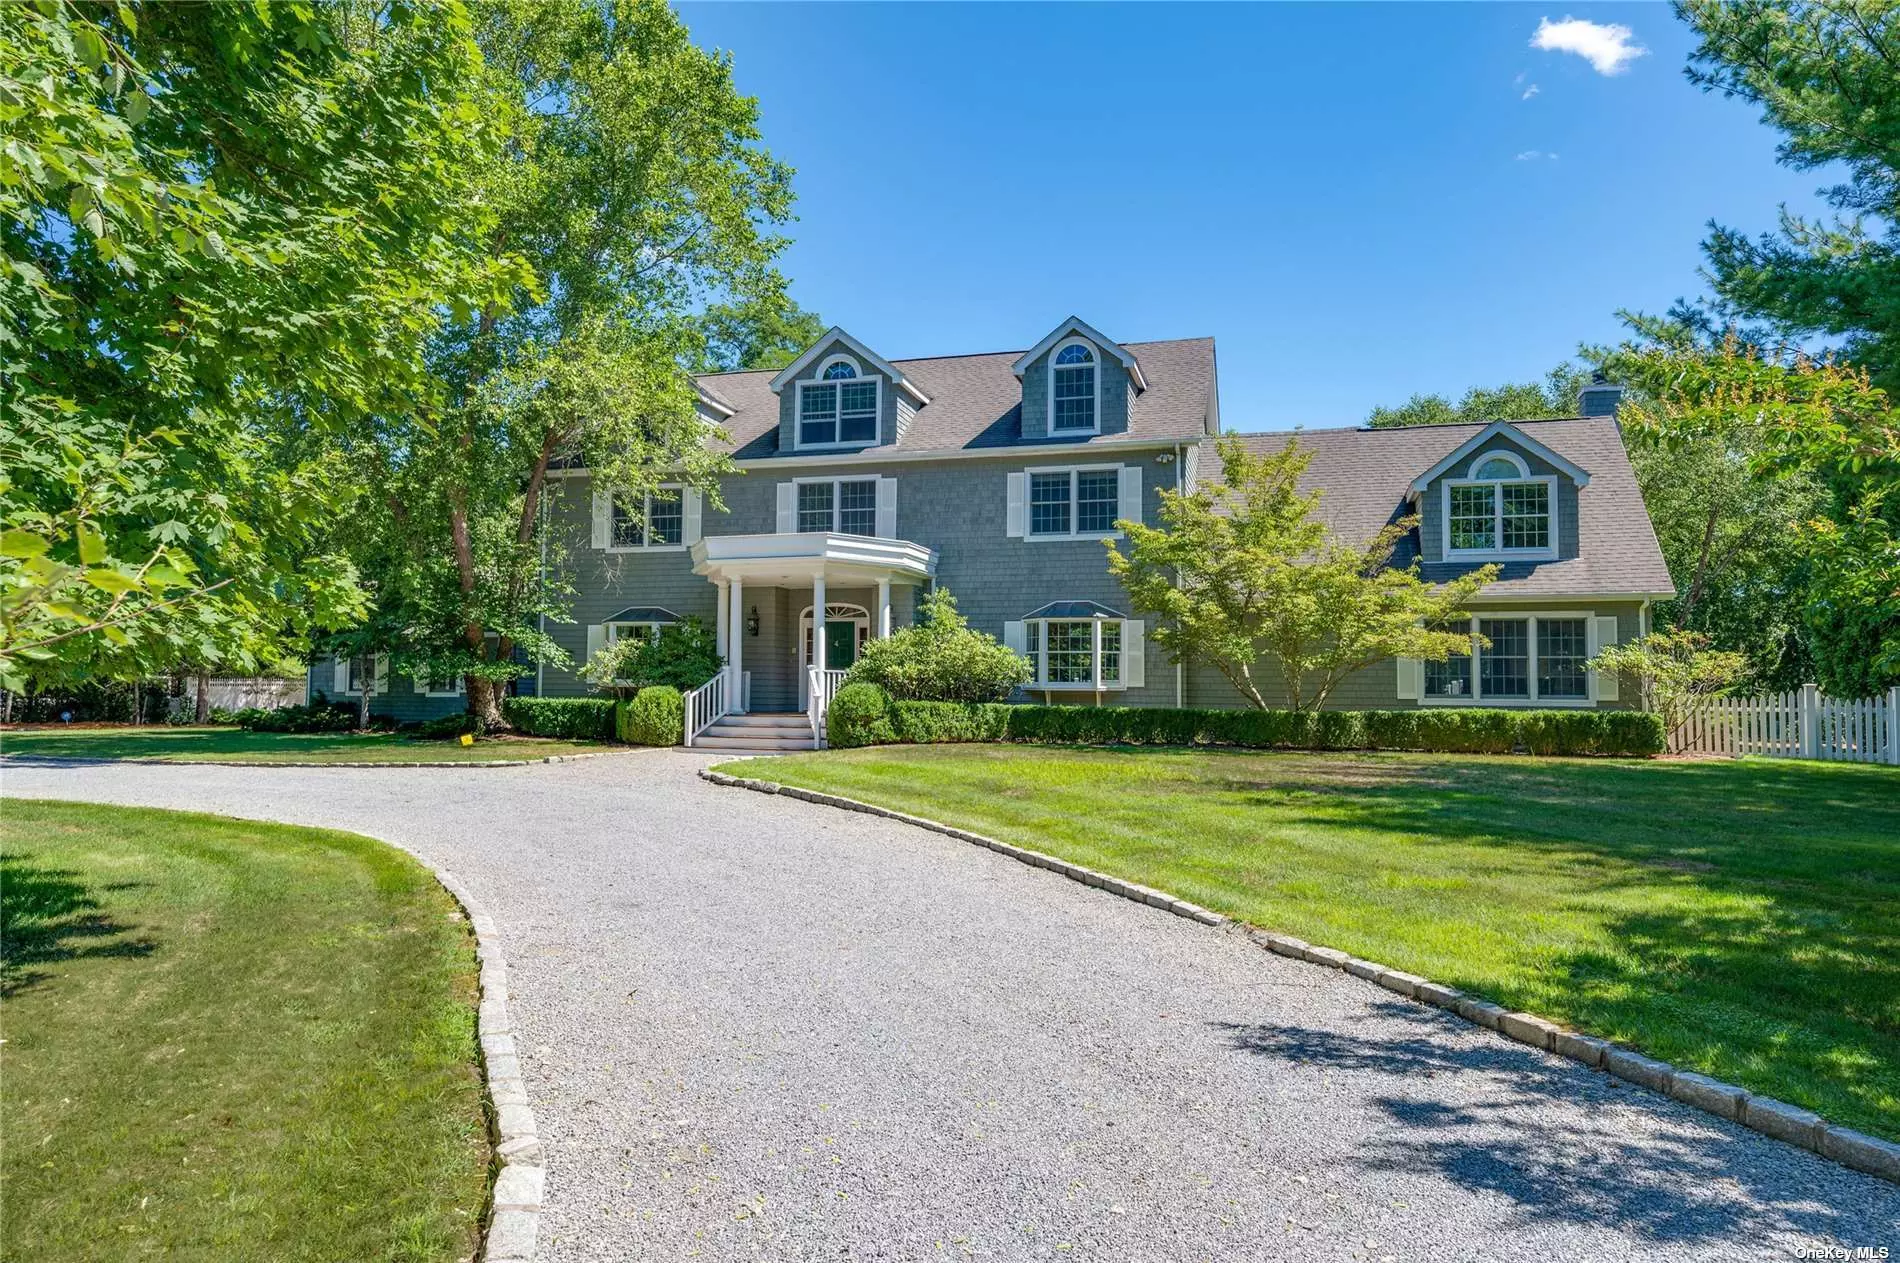 Welcome to 4 Hidden Pond Lane, this impressive home is set back from the main road and located on a private street surrounded by almost two acres of beautifully, pristine landscaped grounds. &lt;br&gt;&lt;br&gt; As you arrive through a pillared entrance, the circular pebble stone driveway leads you to the attached and oversized two car garage. You will be charmed by the lovely grey cedar shake fa?ade and white picket fence that lines the back property of this unique home. &lt;br&gt;&lt;br&gt; On the main floor, the inviting living room has a cozy gas fireplace that is flanked by two sets of 3 large glass paned shaker style doors, that lead you to the expansive outdoor deck with a gas grill overlooking the tasteful gunite swimming pool, hot tub and slate stone patio. &lt;br&gt;&lt;br&gt; This truly oversized and special home offers you everything you will need. With 5 generously sized bedrooms, 5 full baths and 2 half baths, a formal dining room, a media room, laundry room, cedar sauna, a home office, a den, an extra-large chef&rsquo;s kitchen fitted with maple cabinetry, a breakfast island, granite counter tops, Viking stainless steel appliances to include a microwave, wine fridge and ice maker and can also hold an addition dining table to easily accommodate 8. &lt;br&gt;&lt;br&gt; Conveniently located on the first-floor, just off the living-room is a primary bedroom surrounded by large beautiful 8 over 8 windows and a 15 ft ceiling. This lovely bedroom includes an en-suite bath with a glorious steam shower, a vanity with double sinks and a Kohler deep soaking spa tub. &lt;br&gt;&lt;br&gt; Just one flight up on the second floor, you will find another primary and/or master sized bedroom with an en-suite bath that too includes a shower and deep soaking tub, plus three additional rooms that can be used as bedrooms, guestrooms, a home office, den or study. &lt;br&gt;&lt;br&gt; Up one more flight to the third floor you will find even more bonus space, an amazing mahogany paneled room that is perfect for another bedroom or guestroom or any type of special space you may want to create. &lt;br&gt;&lt;br&gt; Built in 2003, this magical and unique property is much more than you can imagine, and a must see to truly get the feel of this rare and notable home. With over 6700 square ft. of living space, this tremendous home is perfect for a summertime retreat at the beach with family and friends and a grand year- round home. Other notable features include central air conditioning with 3 heat and a/c zones, an alarm system, outdoor irrigation along with closets and storage galore. Move right in or bring your contractor to create your own special interior. &lt;br&gt;&lt;br&gt; Close to Village shopping, caf?s, restaurants and everything you will need. Easy to show - please contact me for a private viewing or make an appointment for our next weekend open house.